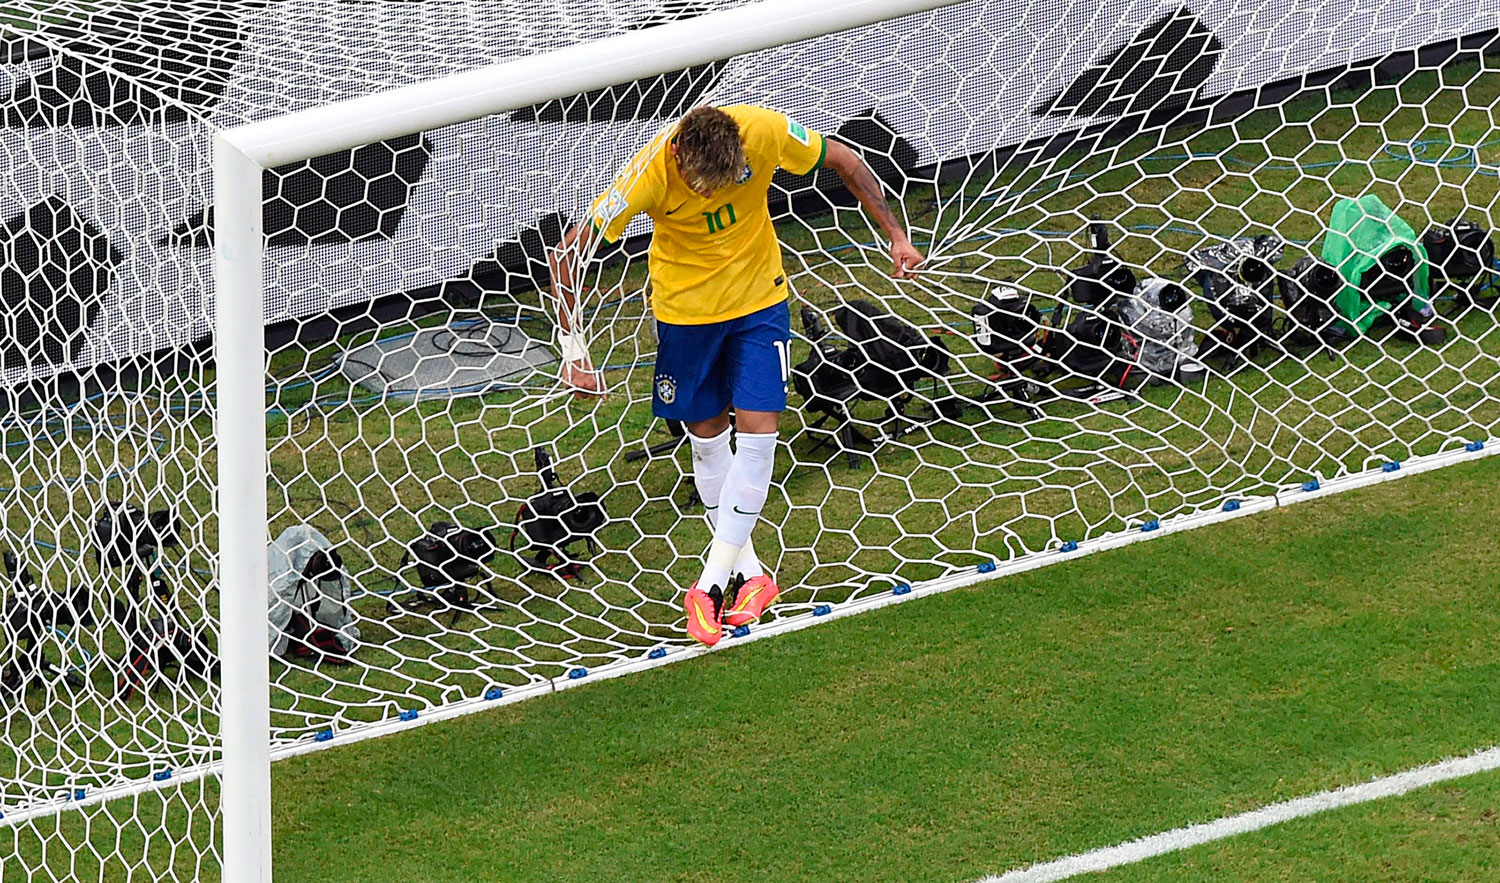 Brazil's forward Neymar reacts after missing a goal opportunity during a match between Brazil and Mexico in the Castelao Stadium in Fortaleza, Brazil on June 17, 2014.